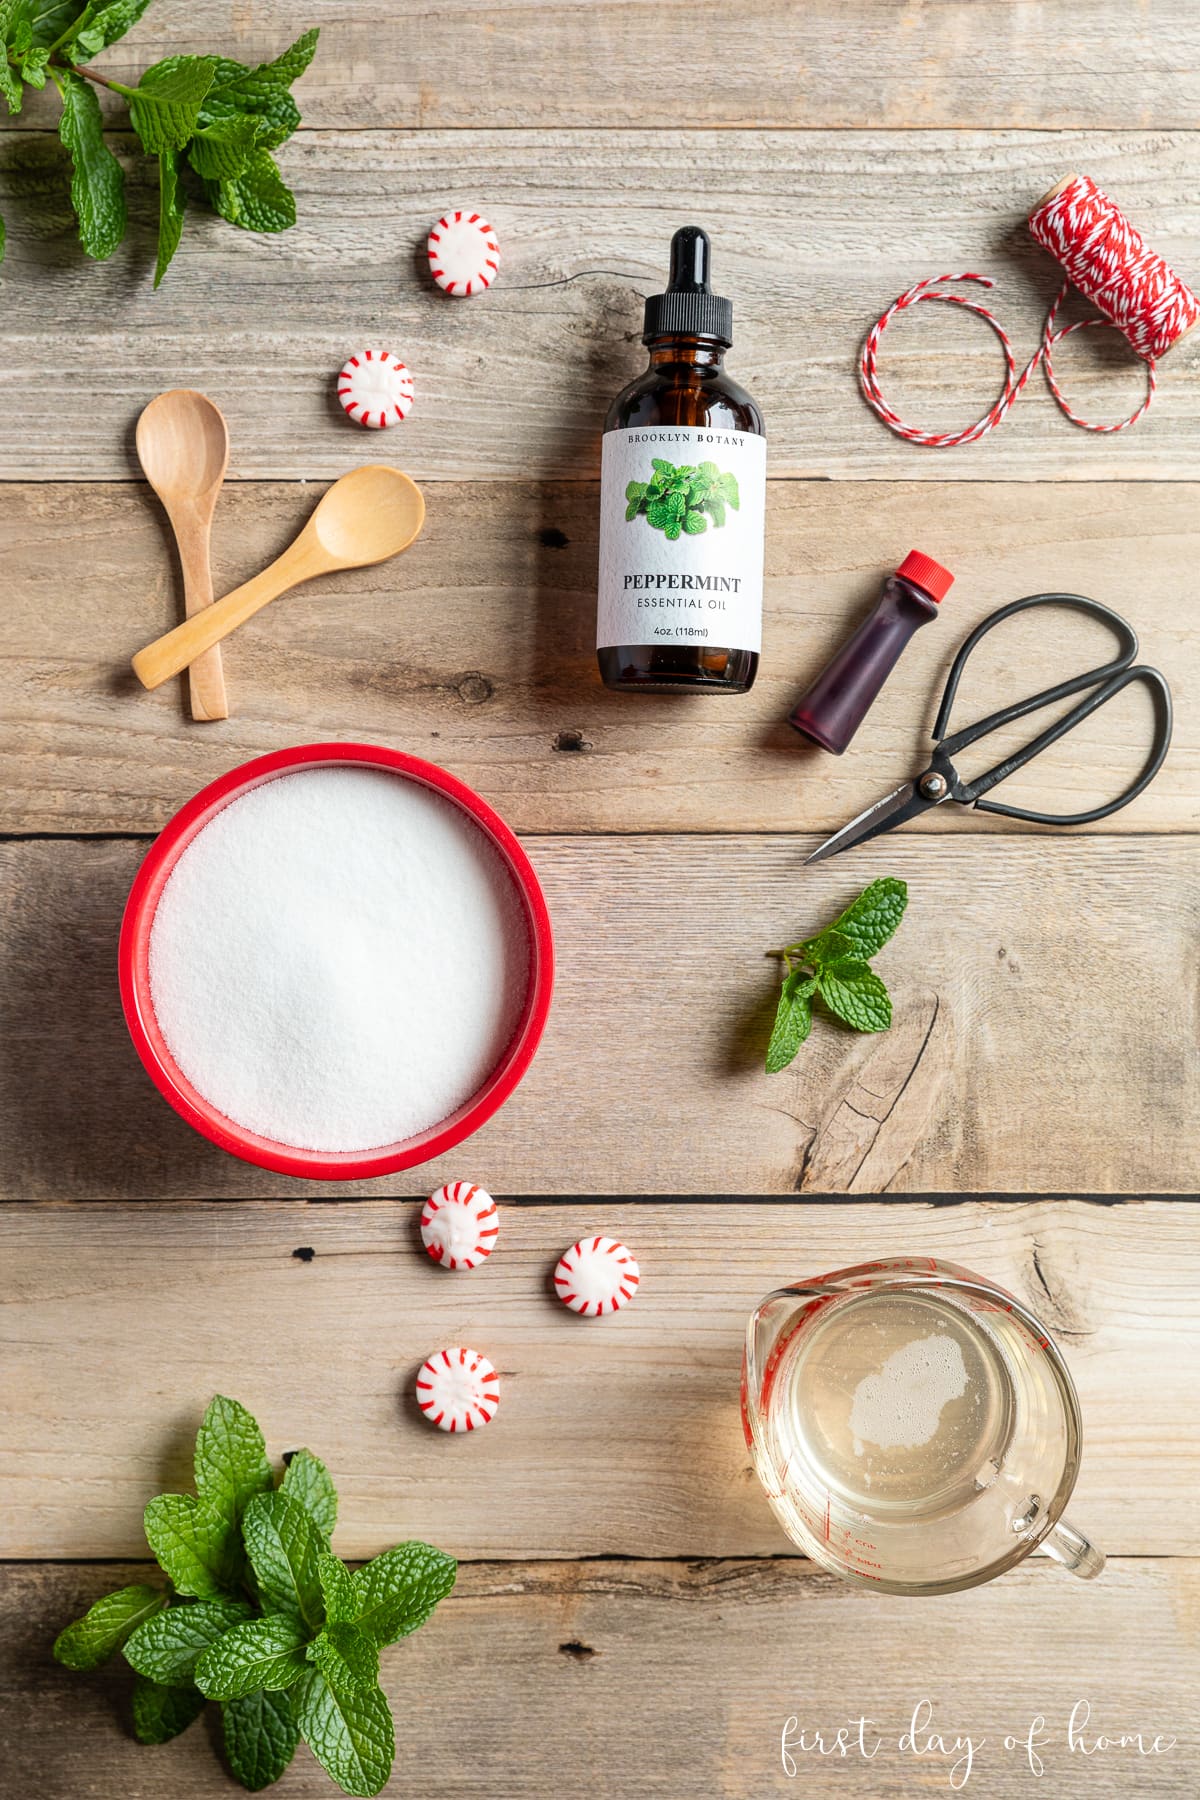 Ingredients for peppermint sugar scrub, including granulated white sugar, melted coconut oil, Peppermint Essential Oil, and optional red food coloring.